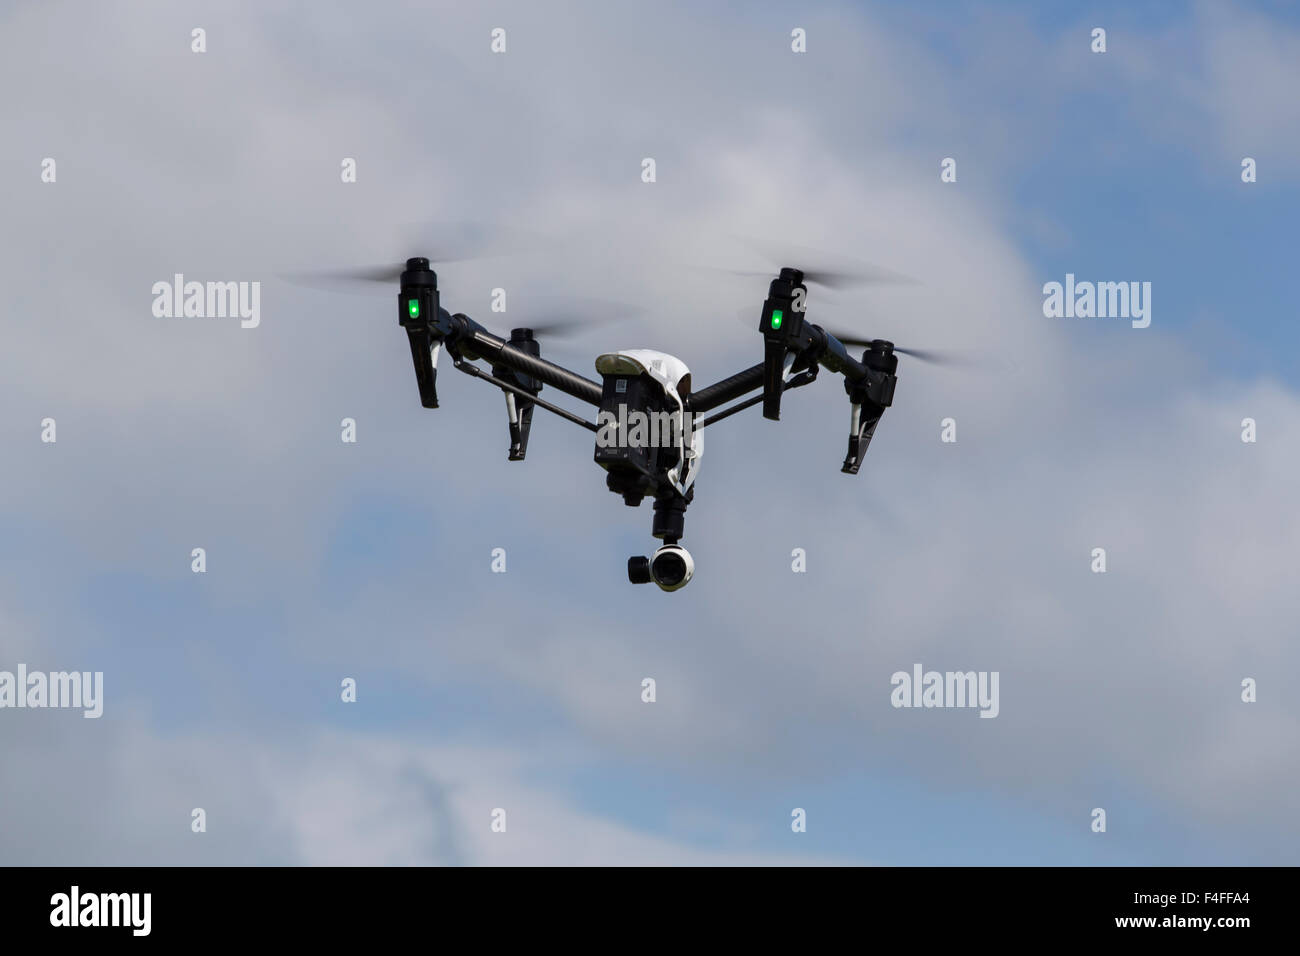 Quadcopter Drone DJI Inspire with camera for aerial photography, photos and videos. Stock Photo